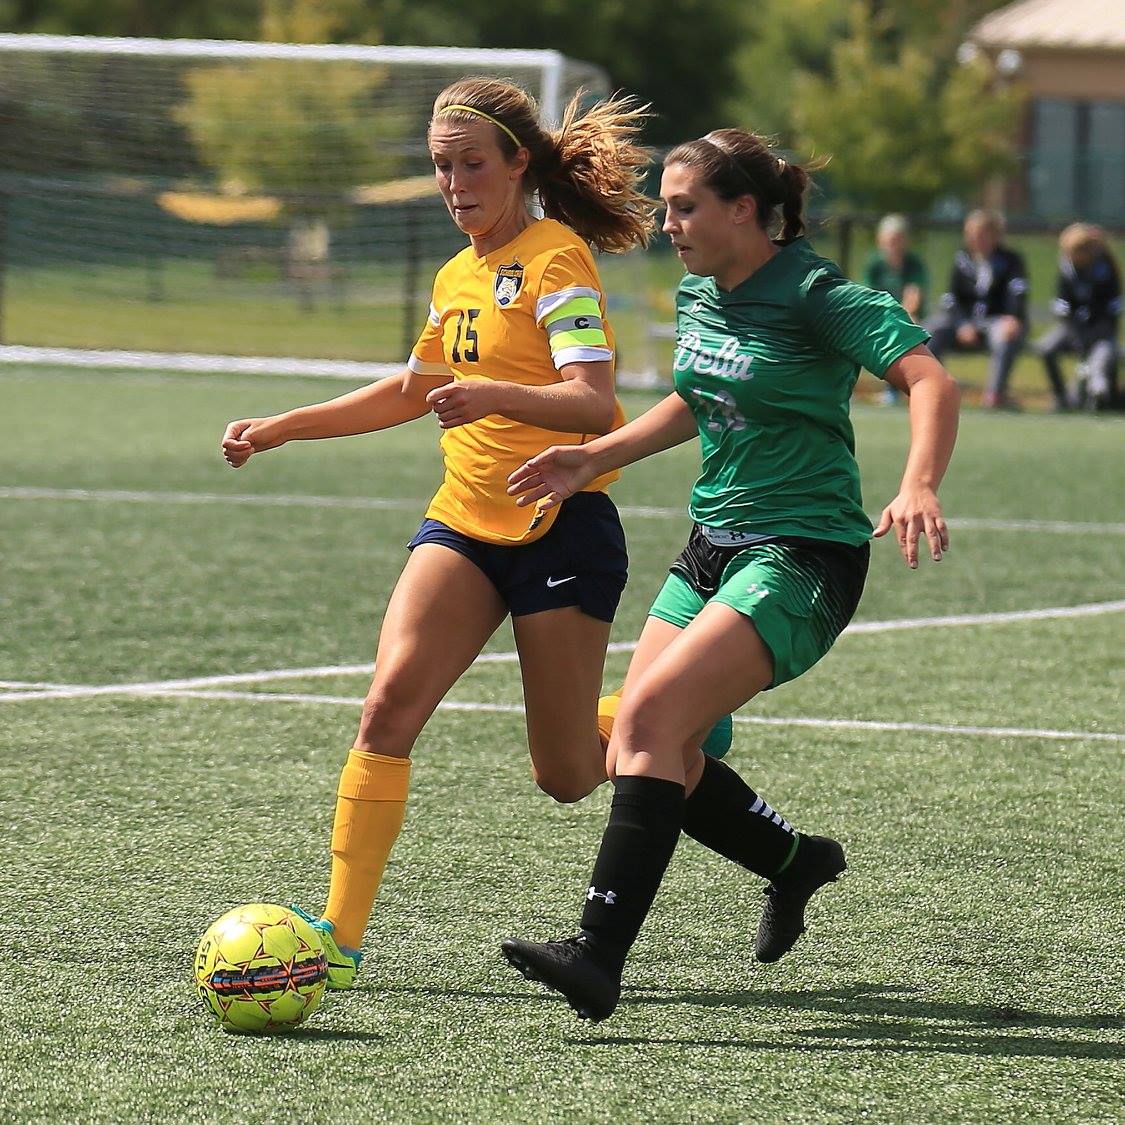 Delta College and Schoolcraft College players battle for the ball